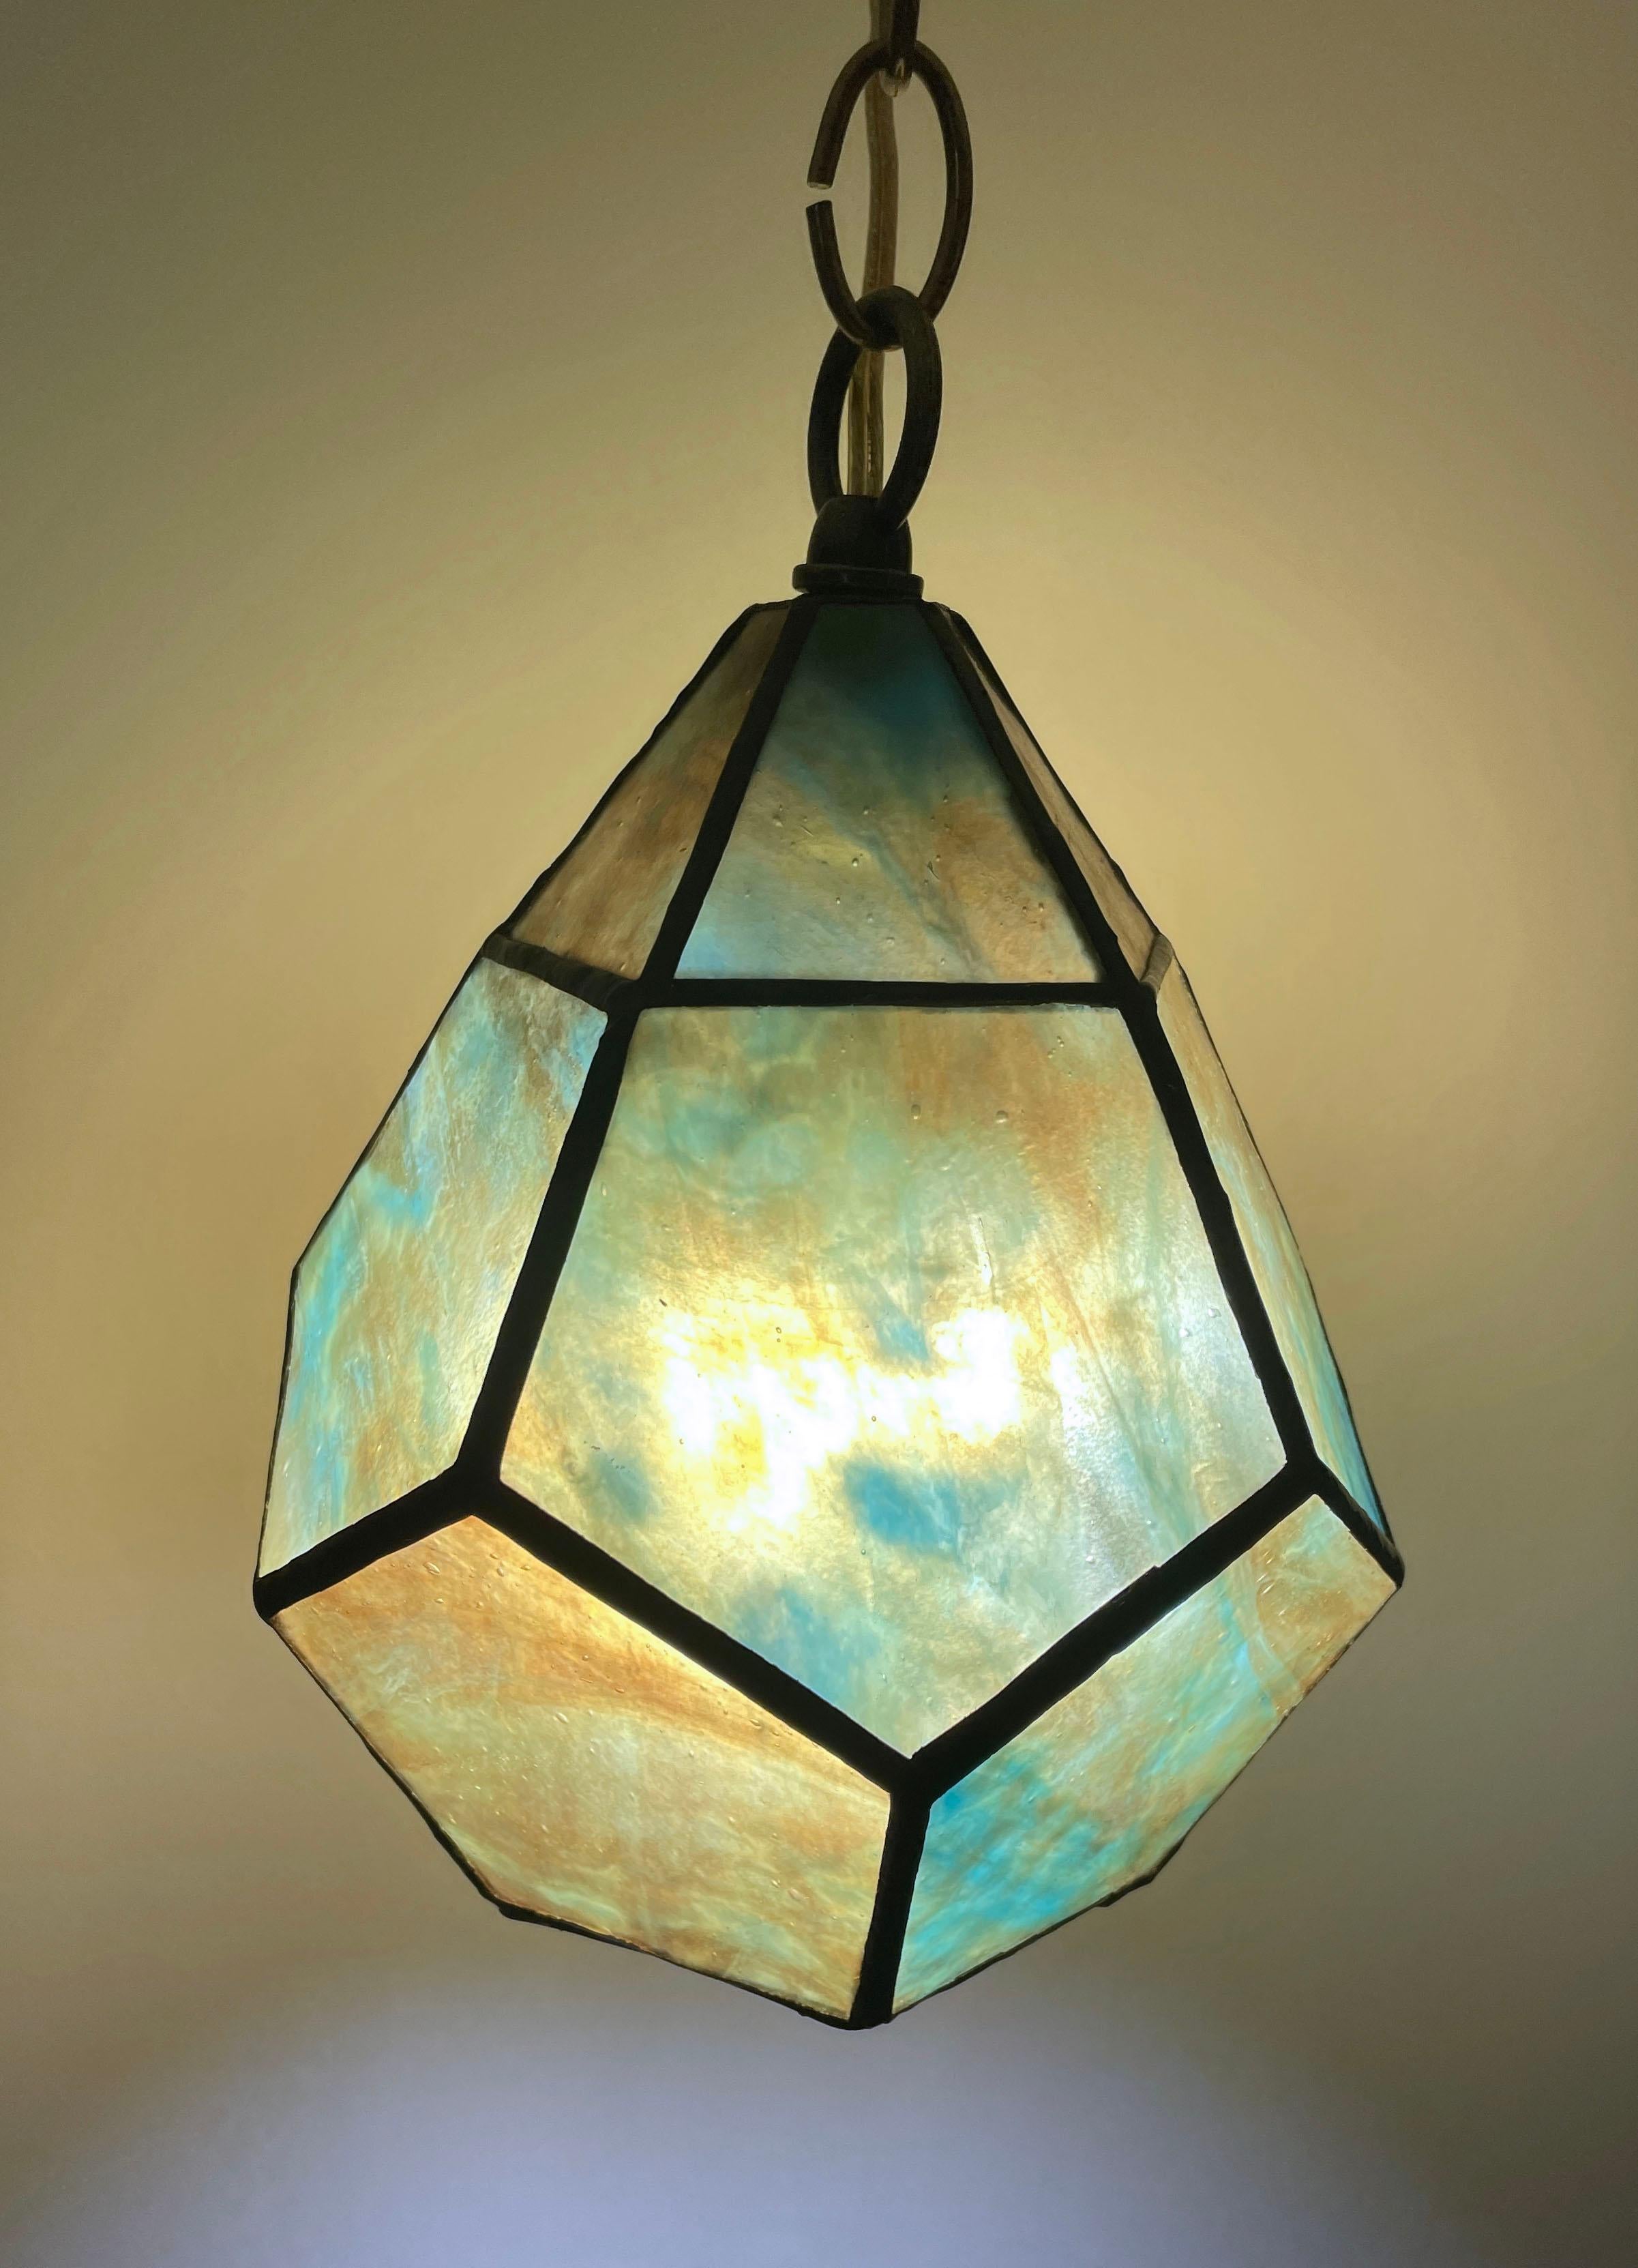 Handcrafted stained glass ceiling lamp with brass hardware, decorators chain and 8ft wall plug with toggle switch. Turquoise and amber glass. Ready to hang.  Multiples available but each one is slightly unique by the hand made nature.  Please